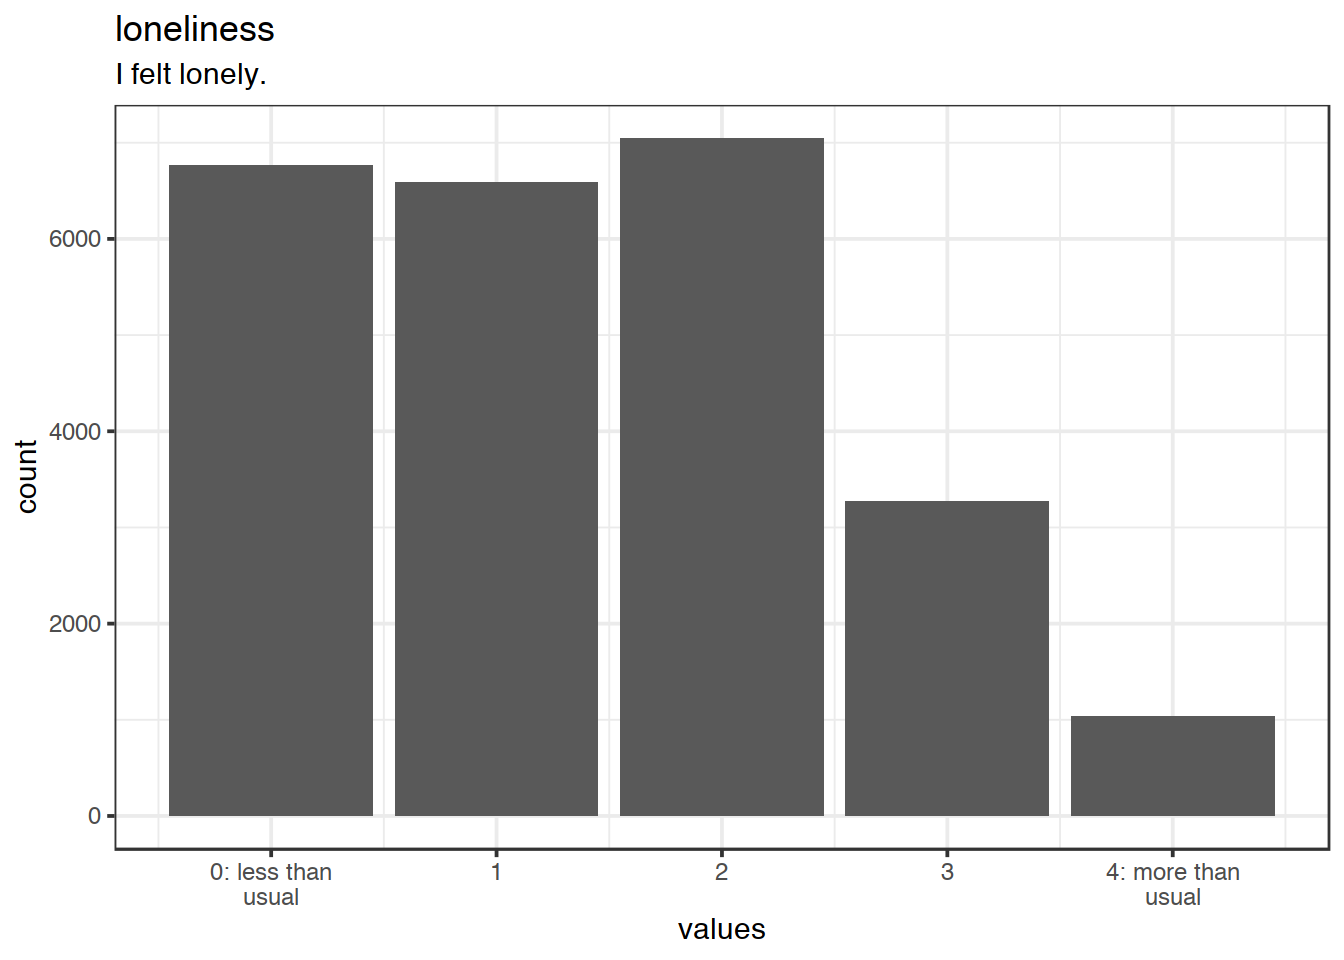 Distribution of values for loneliness